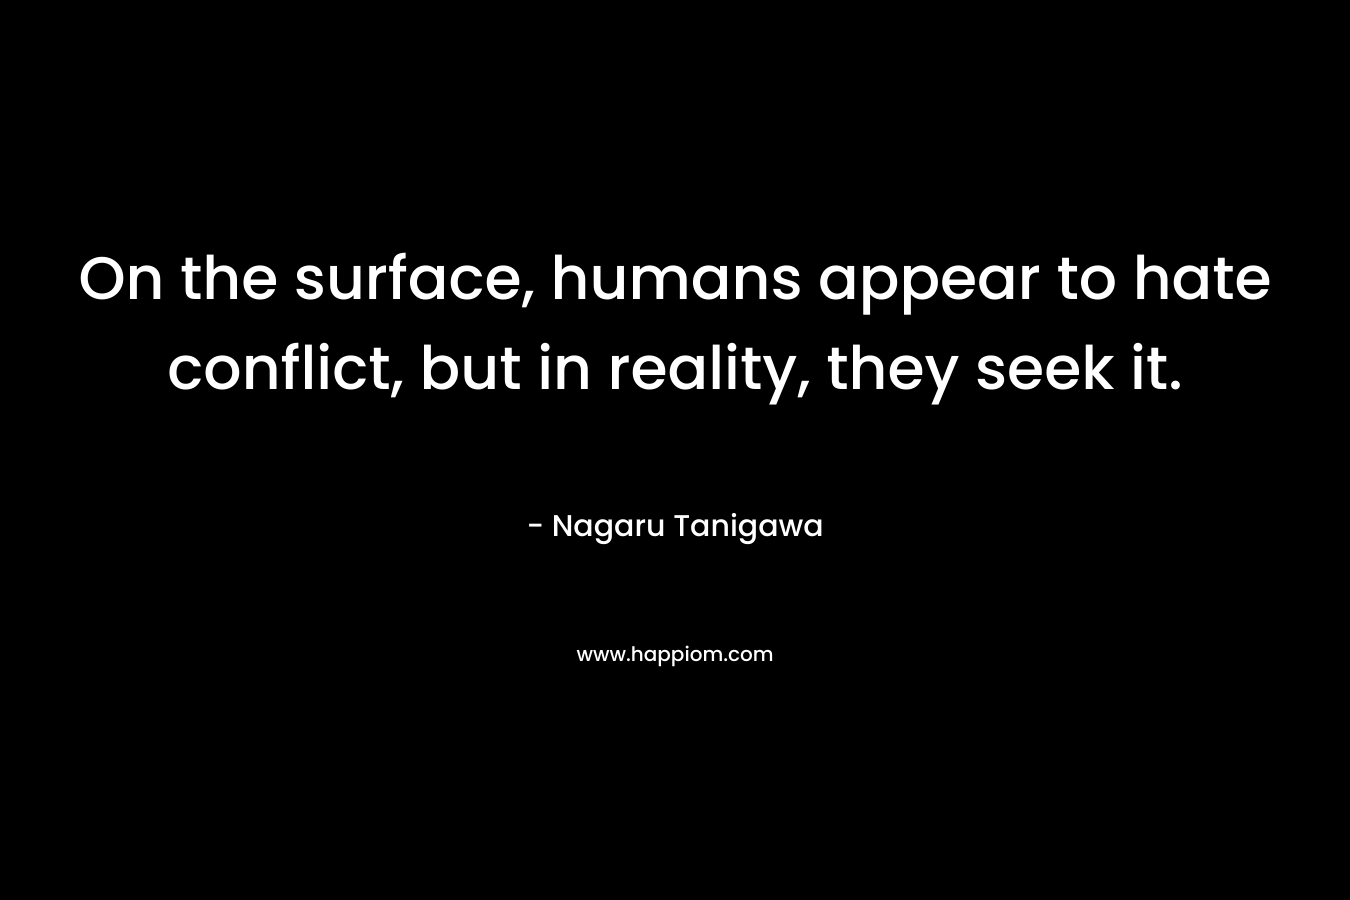 On the surface, humans appear to hate conflict, but in reality, they seek it. – Nagaru Tanigawa